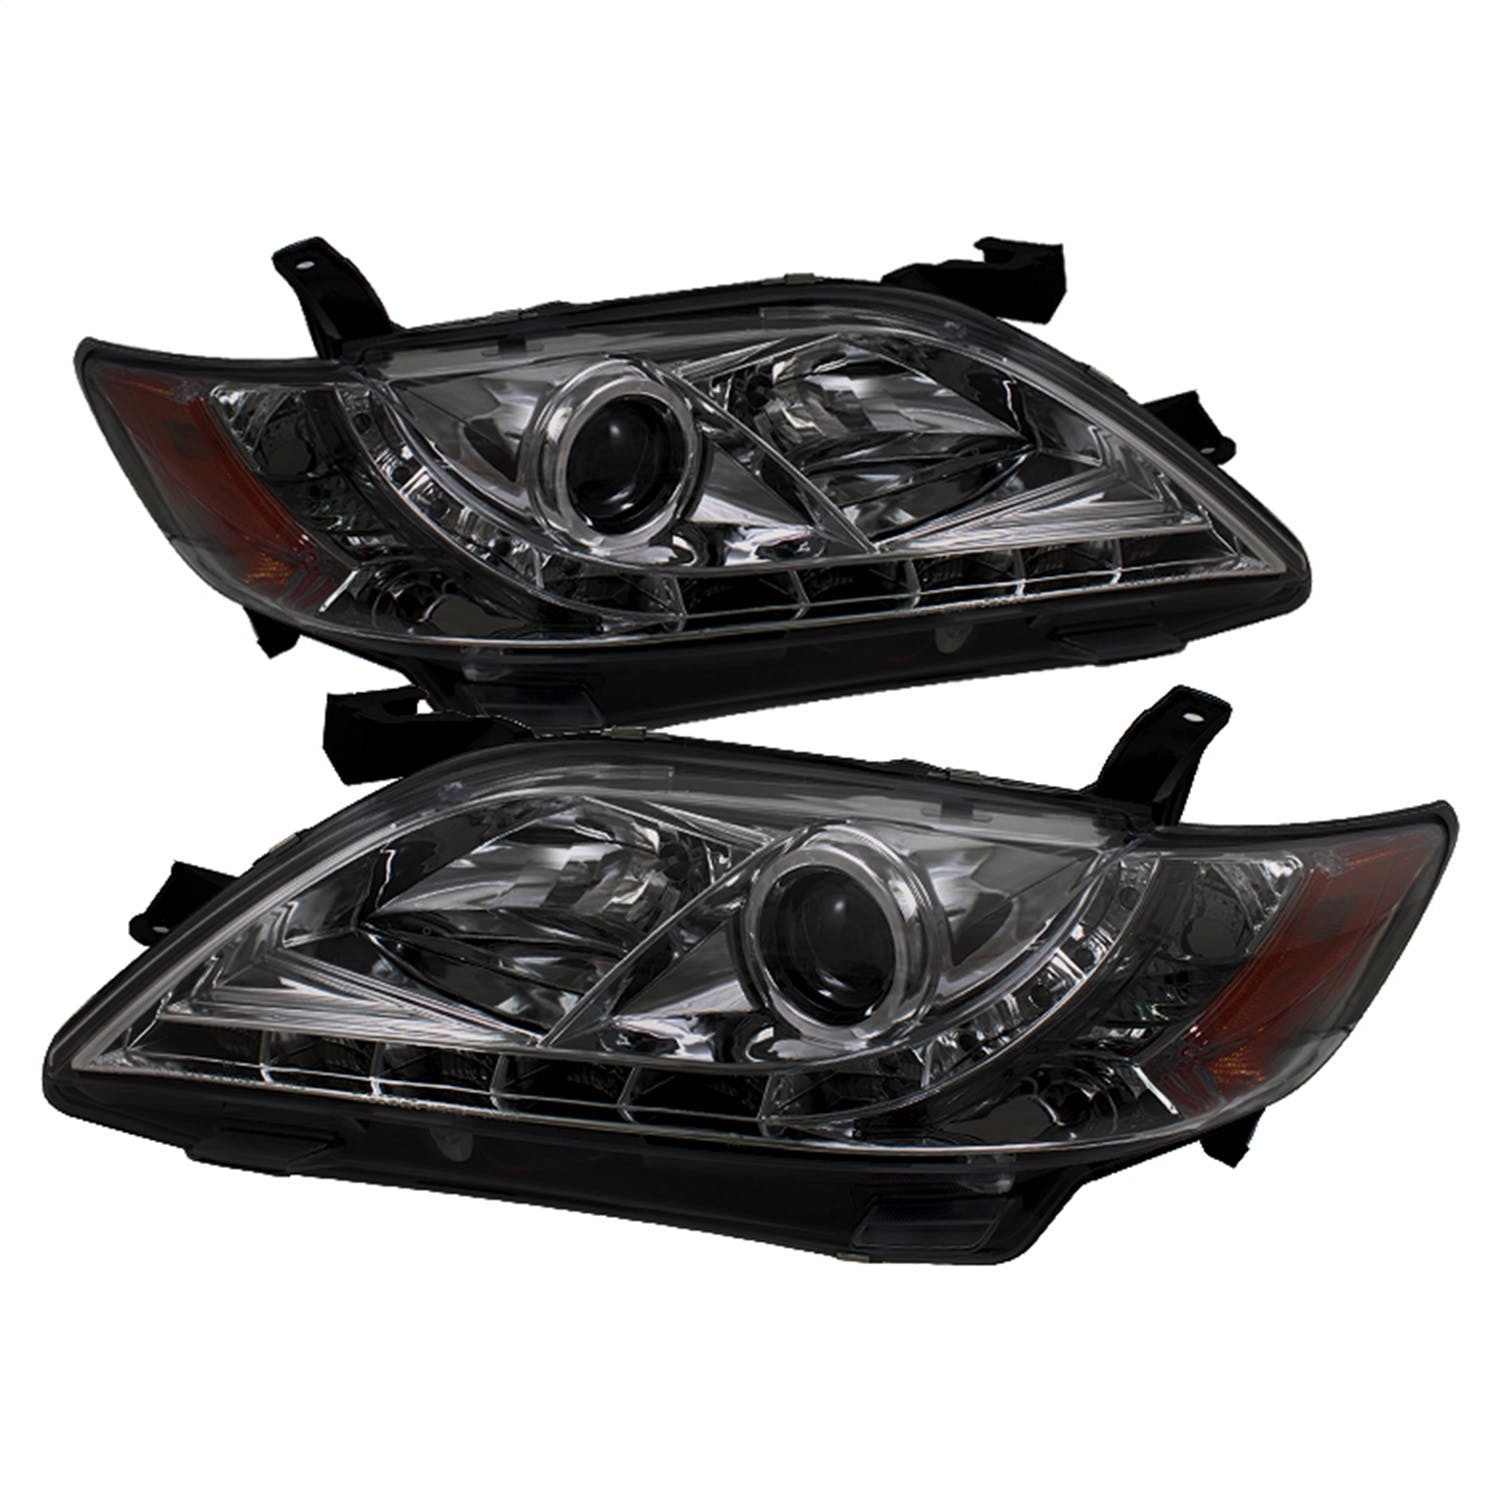 Spyder Auto 5039439 (Spyder) Toyota Camry 07-09 Projector Headlights-DRL-Smoke-High H1 (Included)-Lo